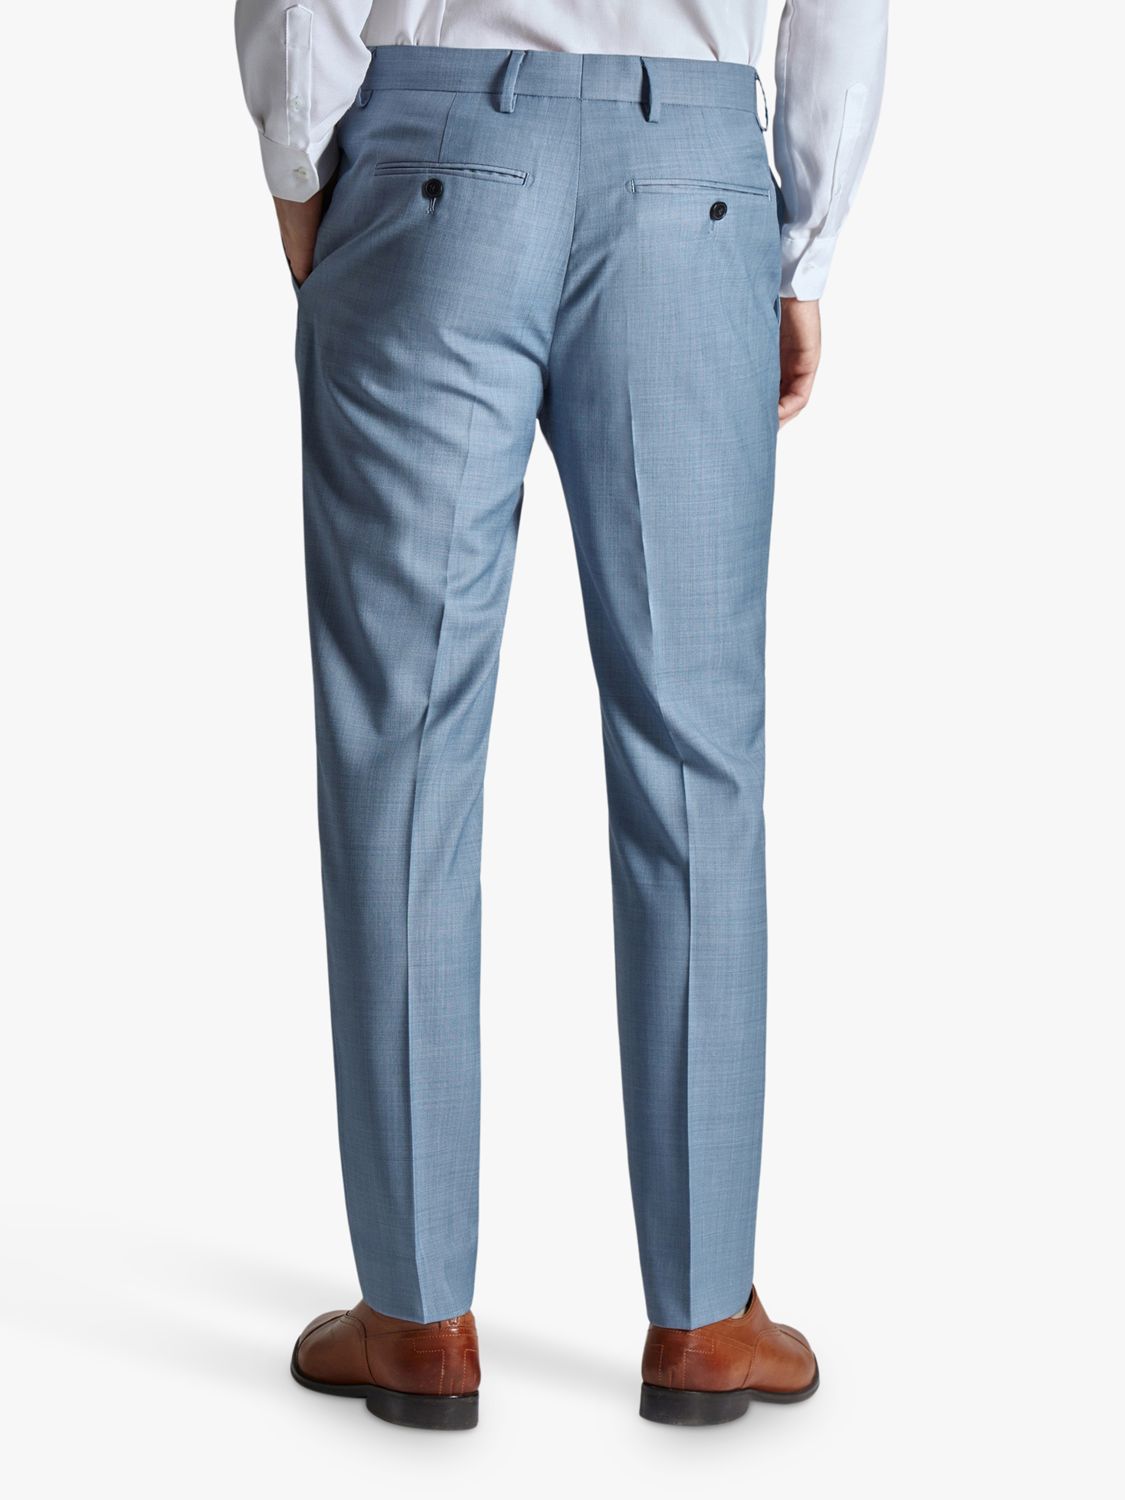 Ted Baker Slim Fit Trousers, Blue, 32S